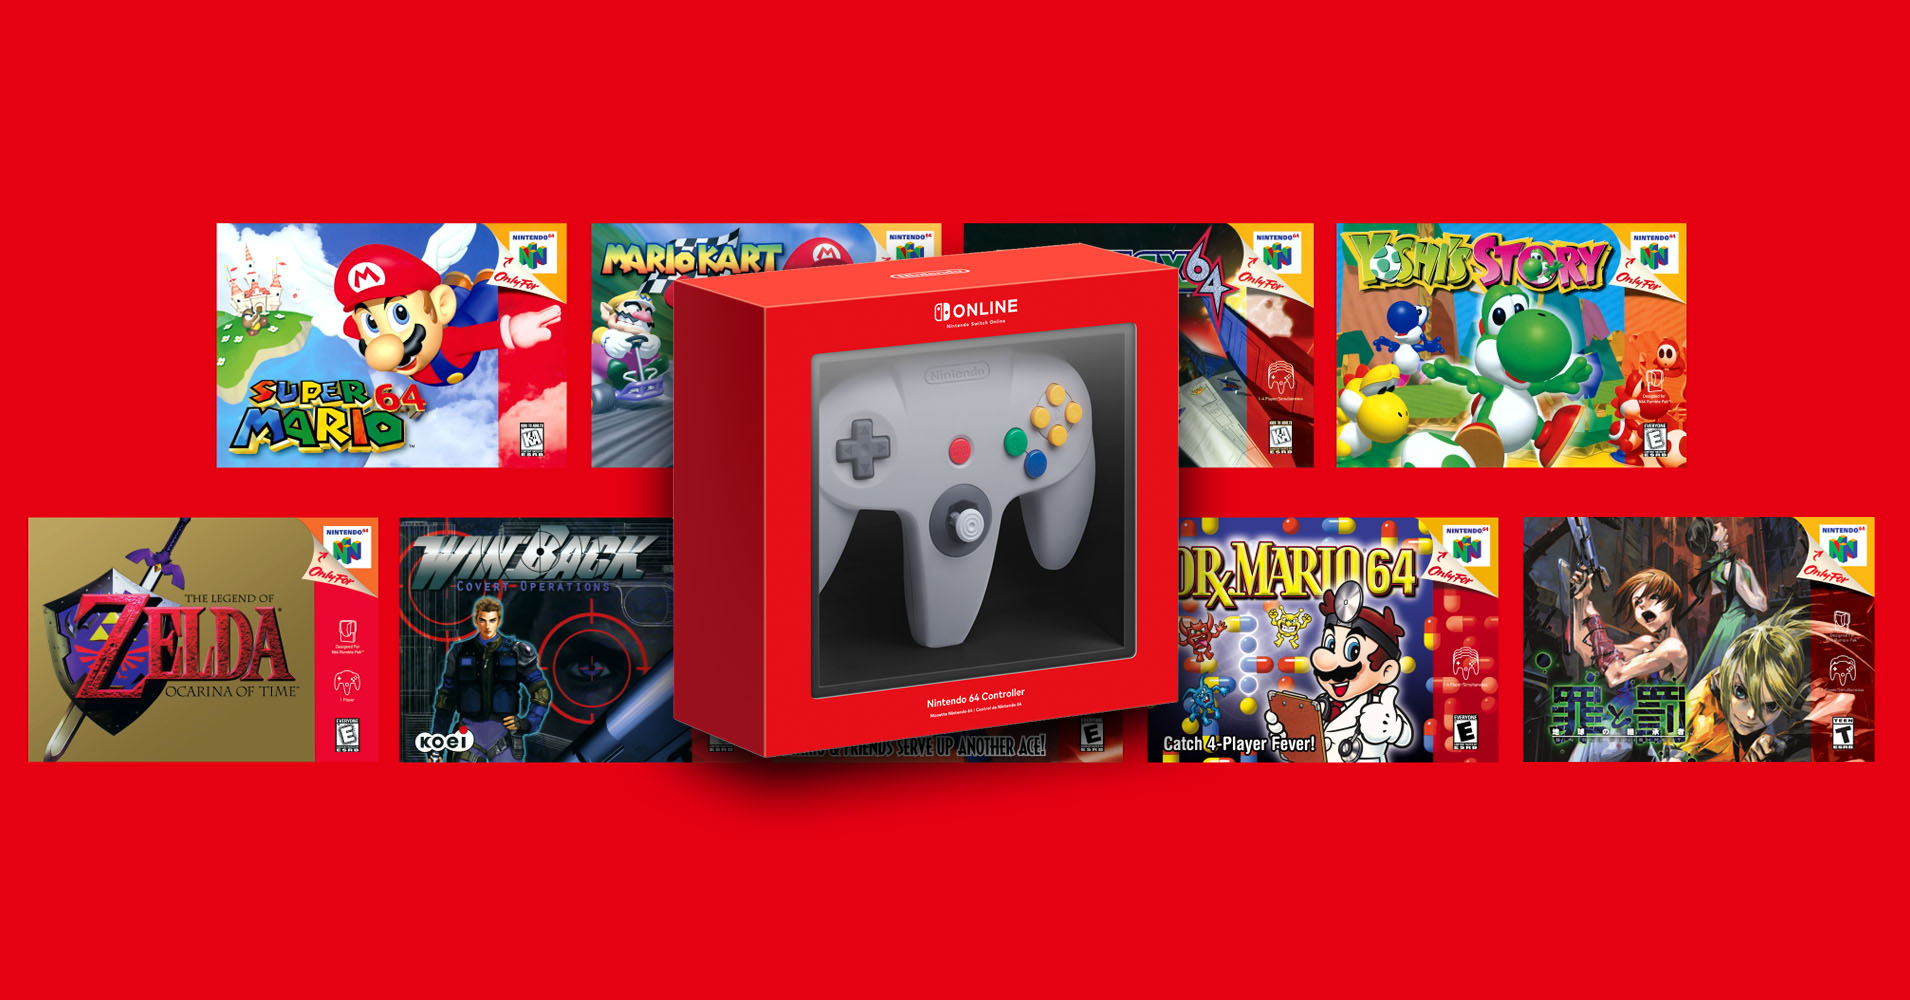 Nintendo Switch gets classic N64 games its controller